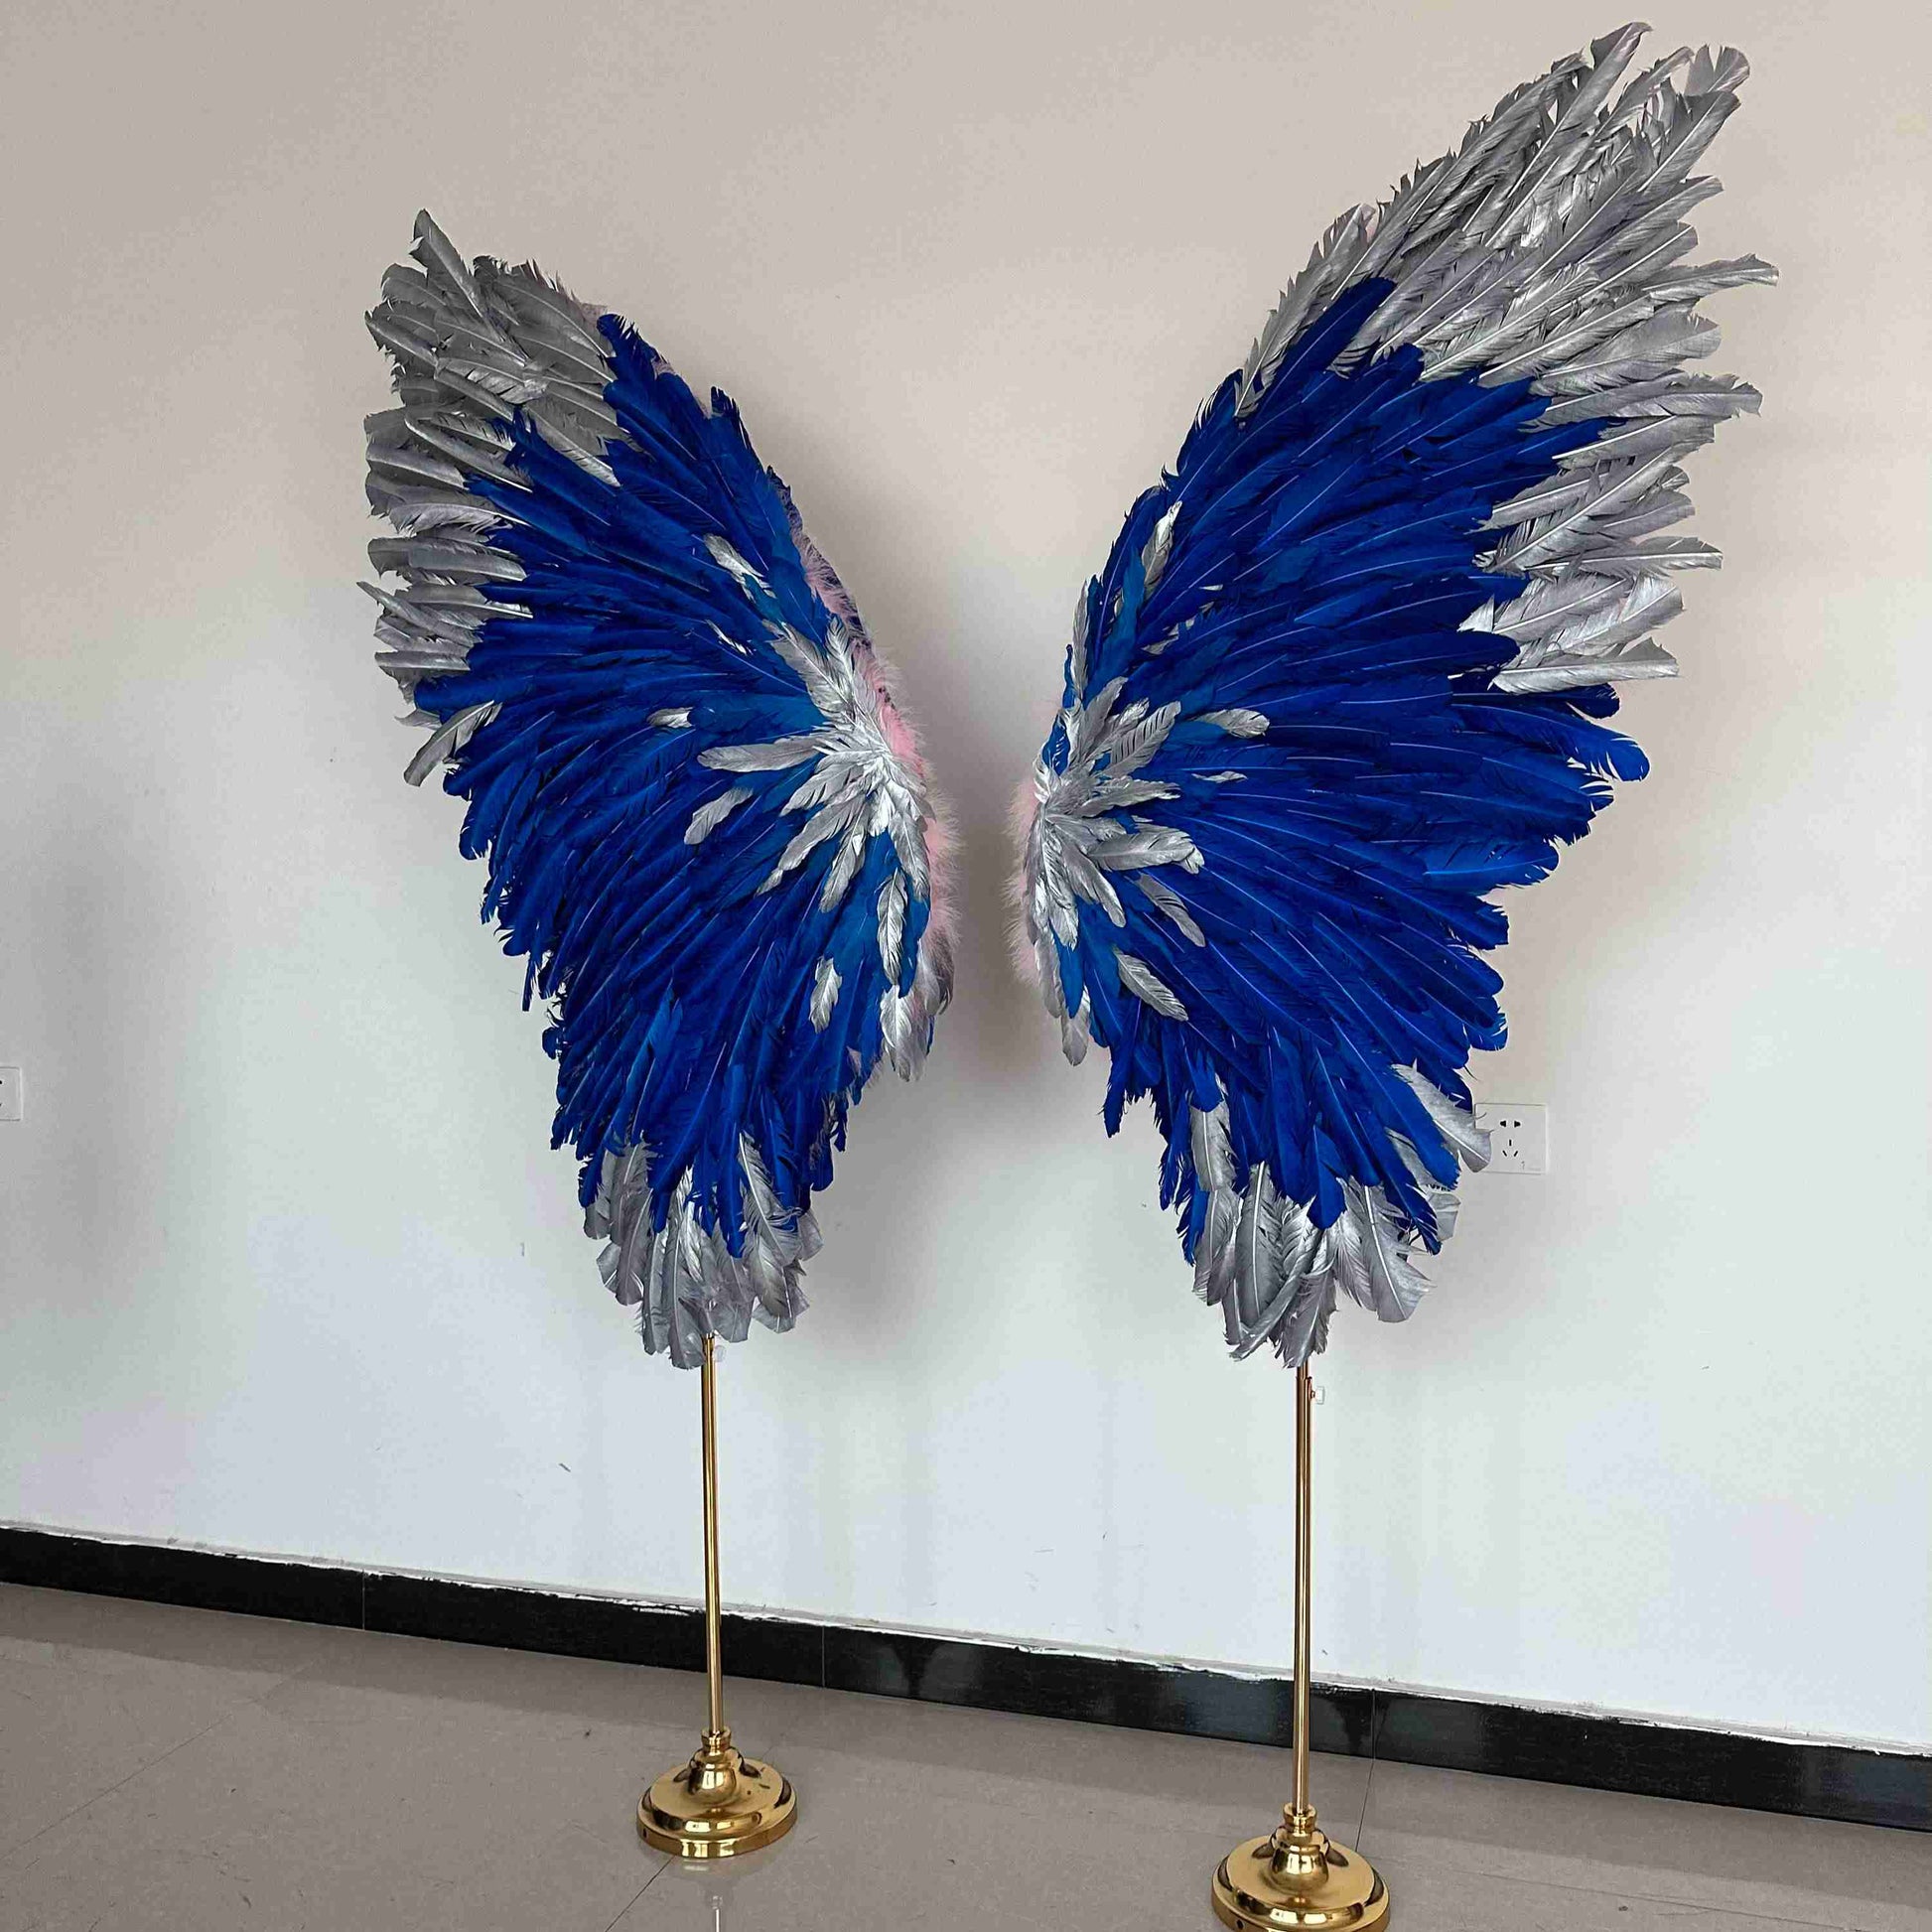 Our silver blue angel wings on poles from the left side. Made from goose feathers. Wings for decoration. Suitable for restaurant, cafe, night club, event decorations.